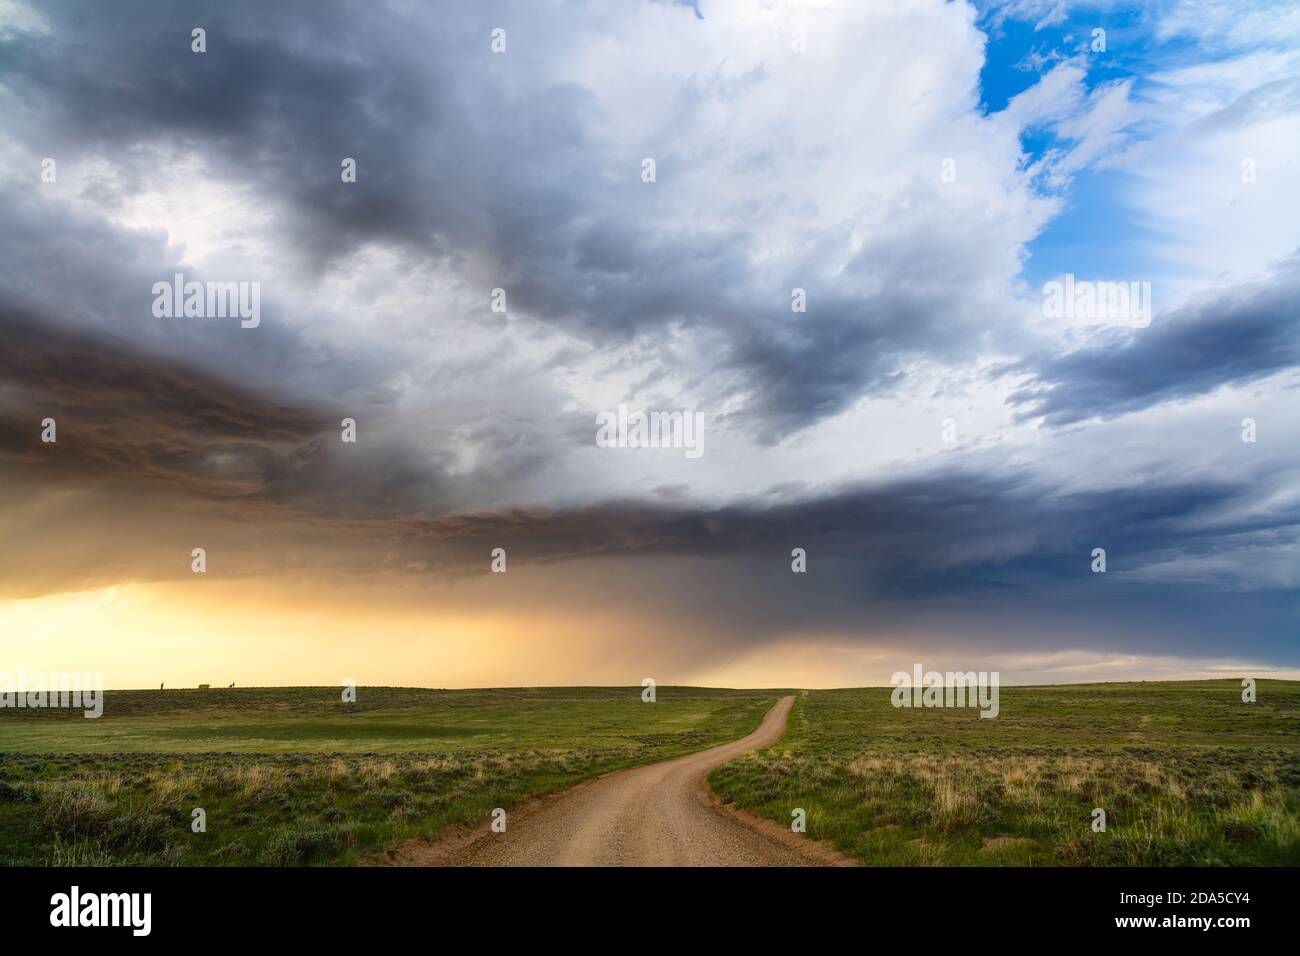 Dirt road through rolling hills with storm clouds in the Thunder Basin National Grassland, Wyoming, USA Stock Photo